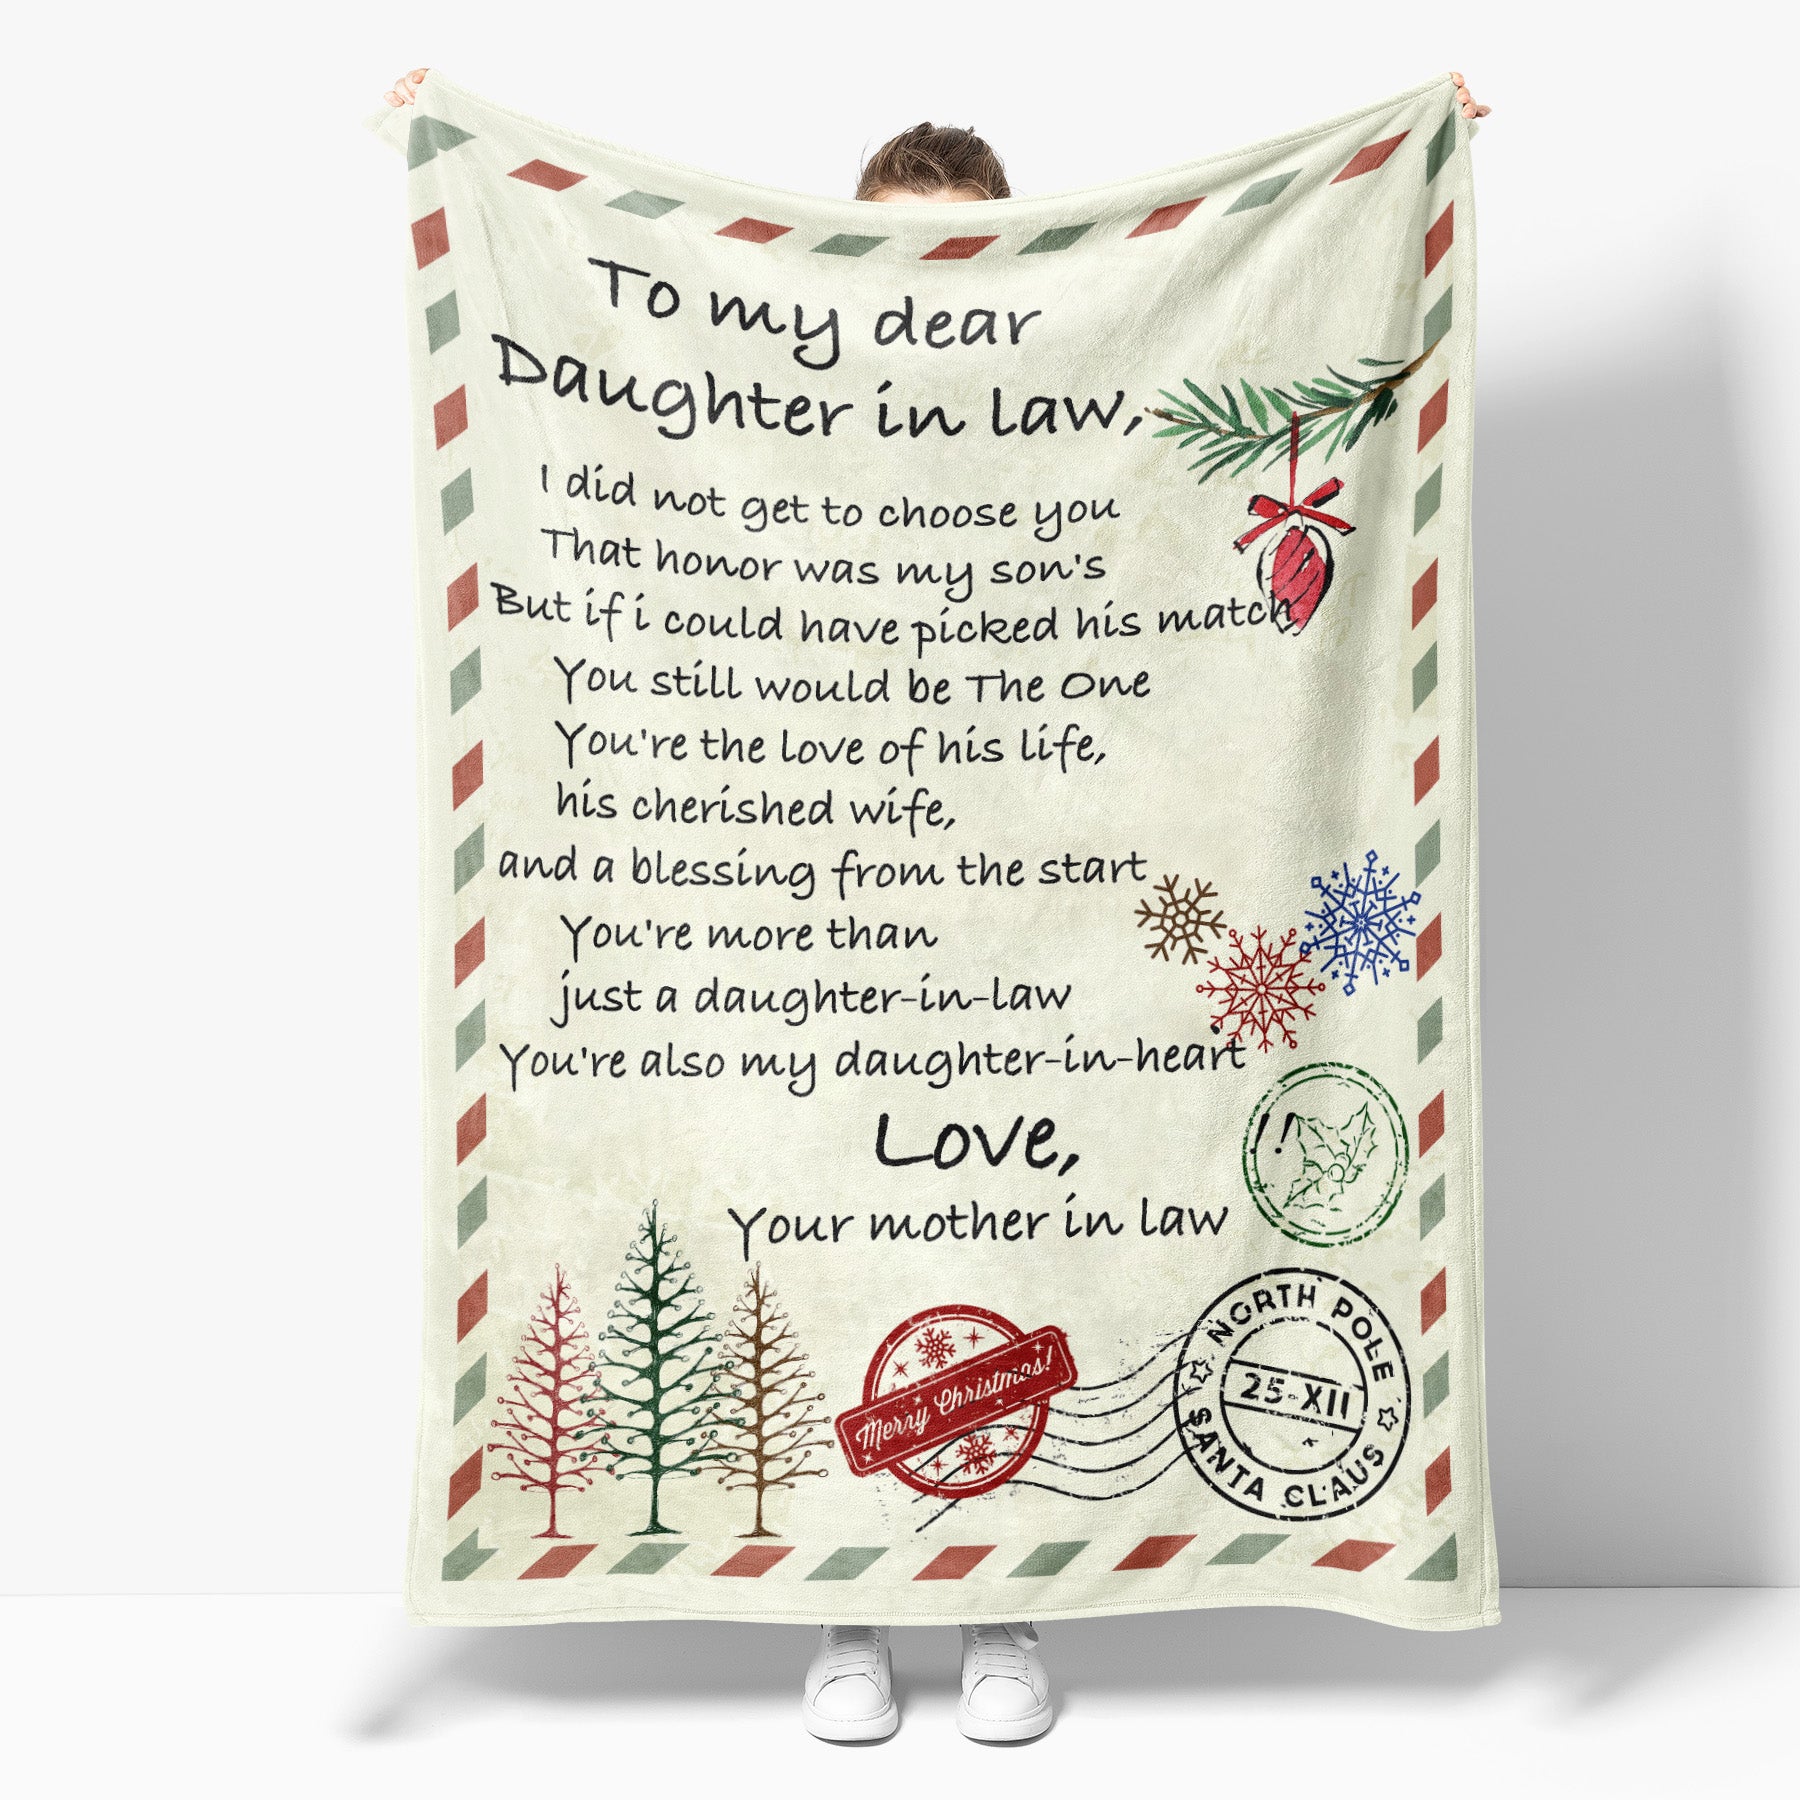 Blanket Gifts For Daughter In Law, Christmas Gifts For Daughter In Law, Get to Choose You